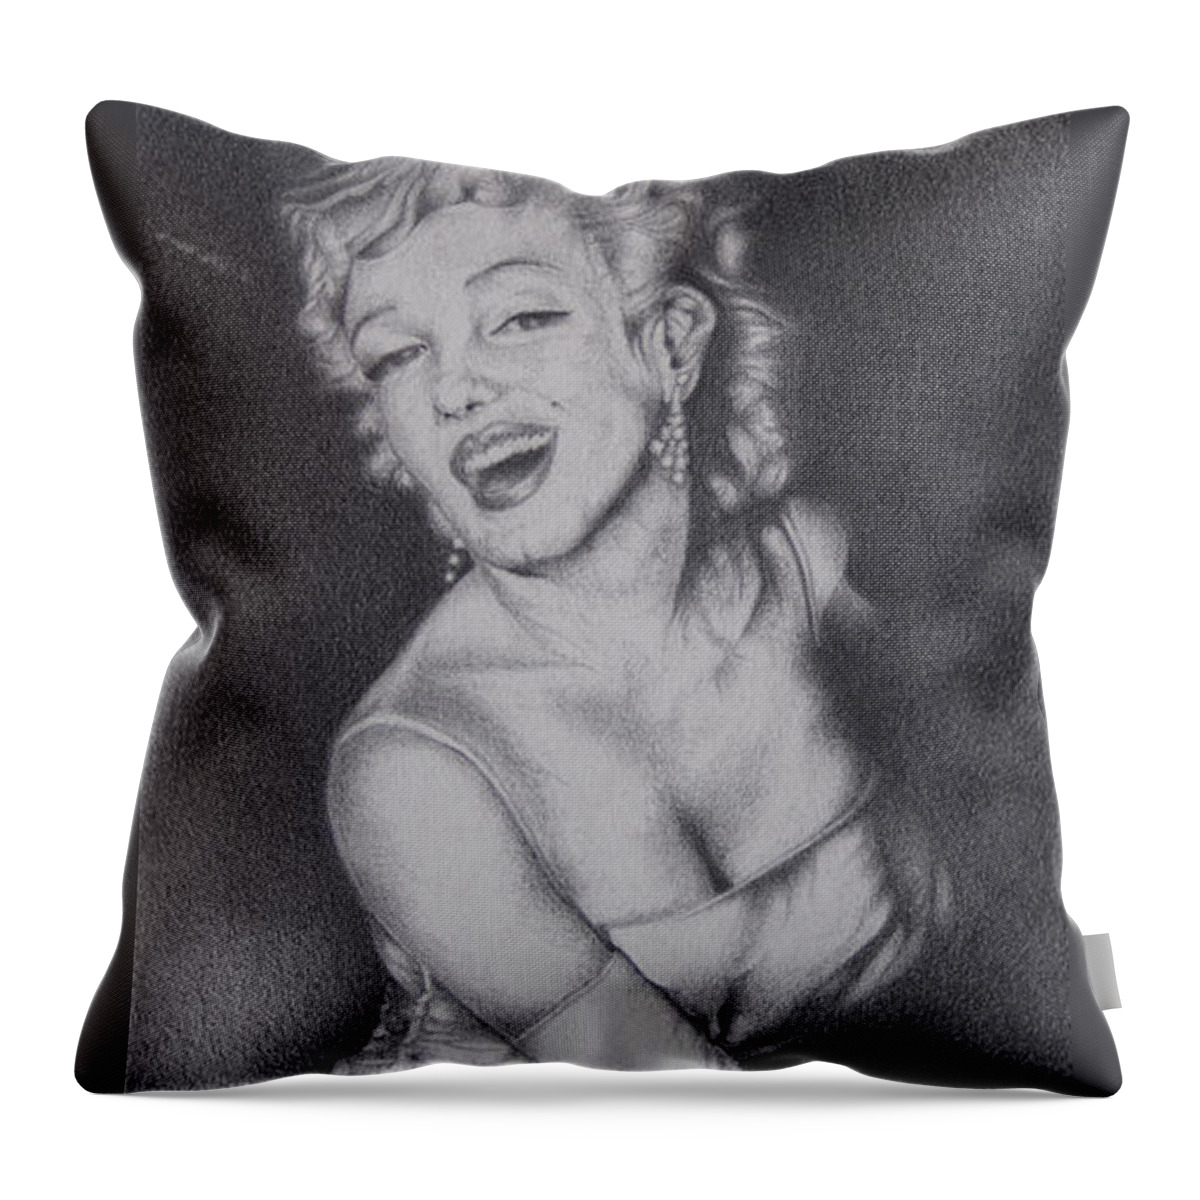 Black And White Art Throw Pillow featuring the drawing Marilyn by Stephen J DiRienzo